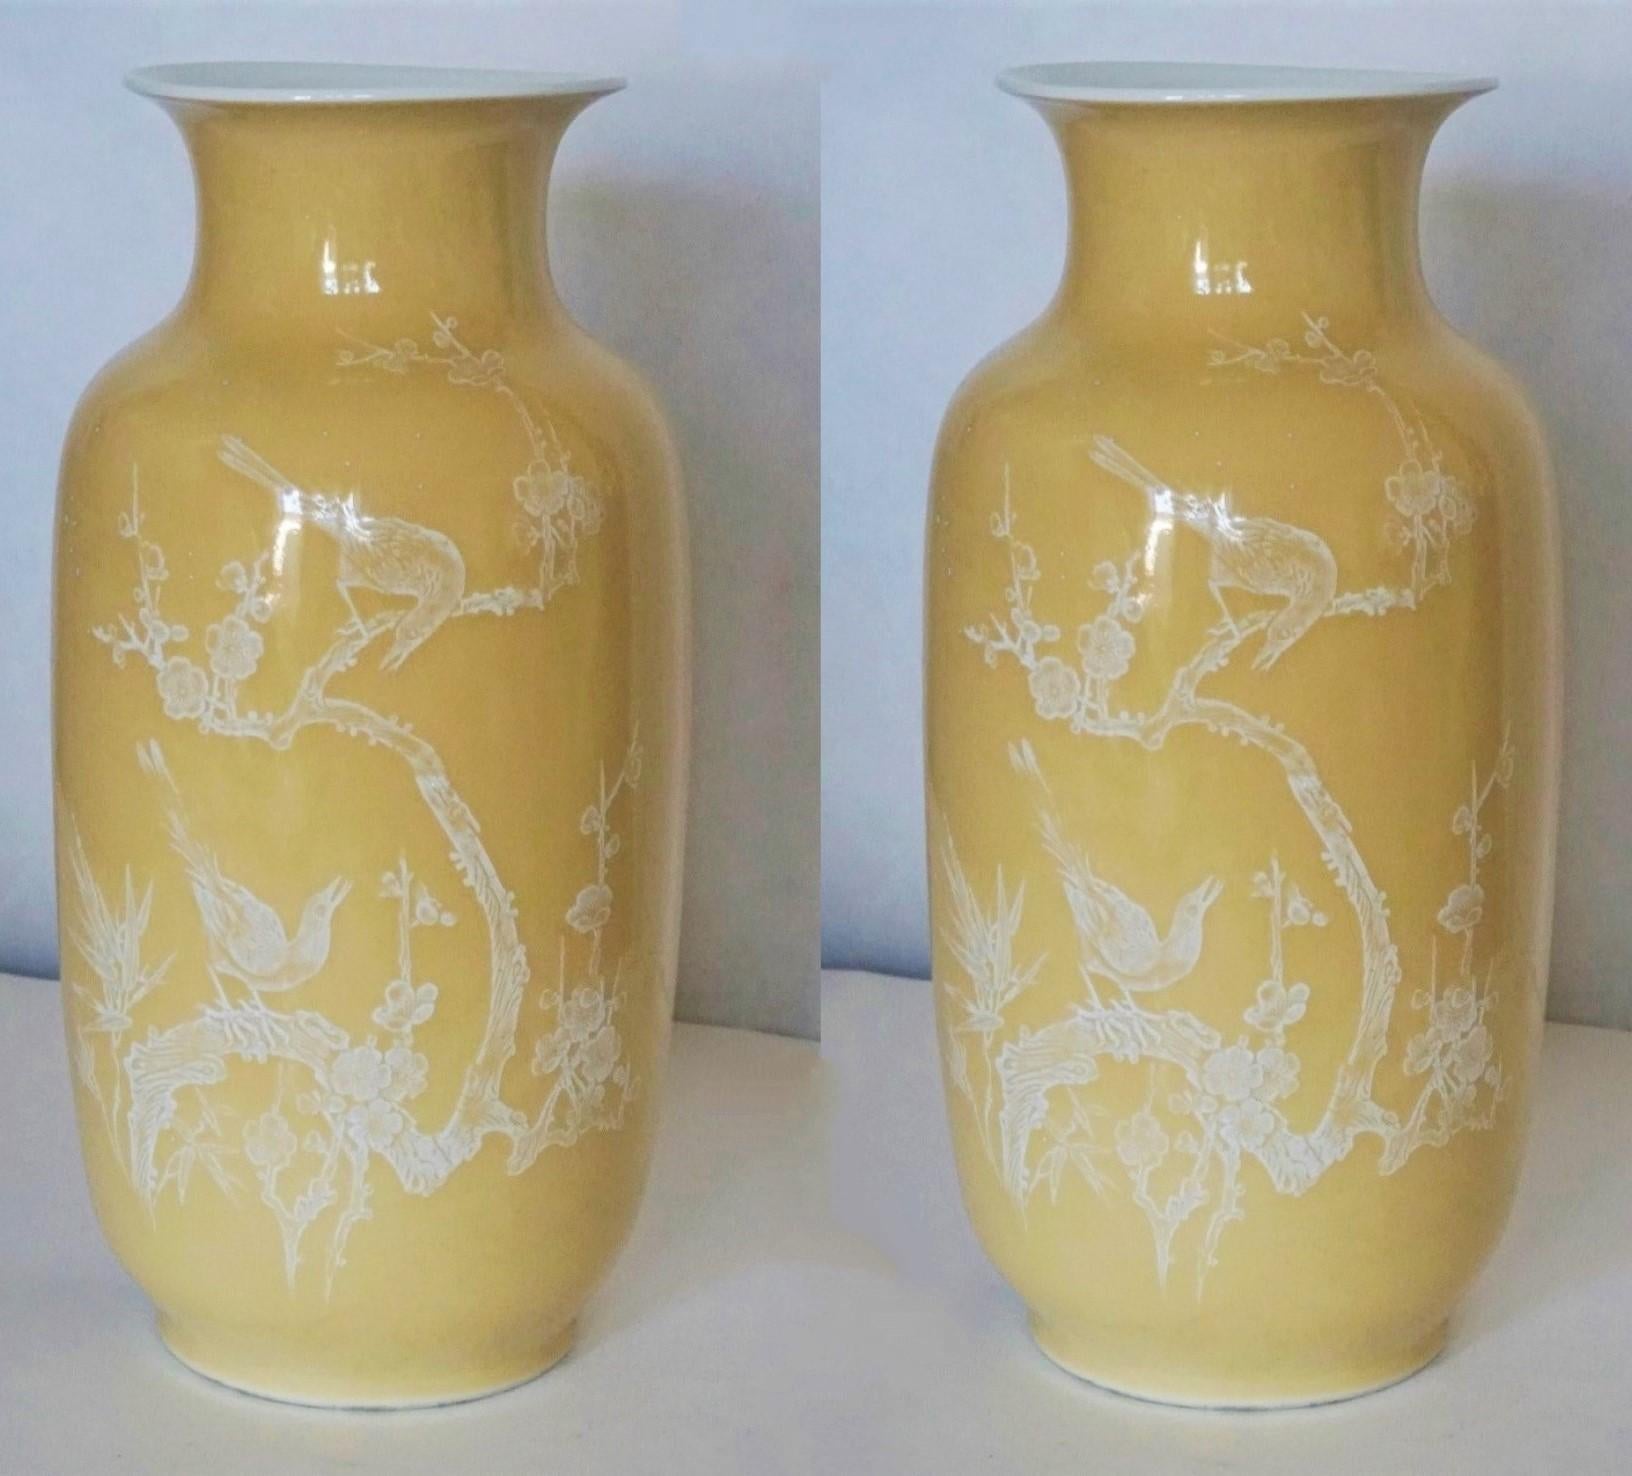 A pair of large, fine Chinese porcelain yellow-ground vases decorated with hand-painted birds and floral motifs on both sides, China, early 20th century. Each vase marked at the bottom.
Condition: Both vases in fine original condition, some wear, no